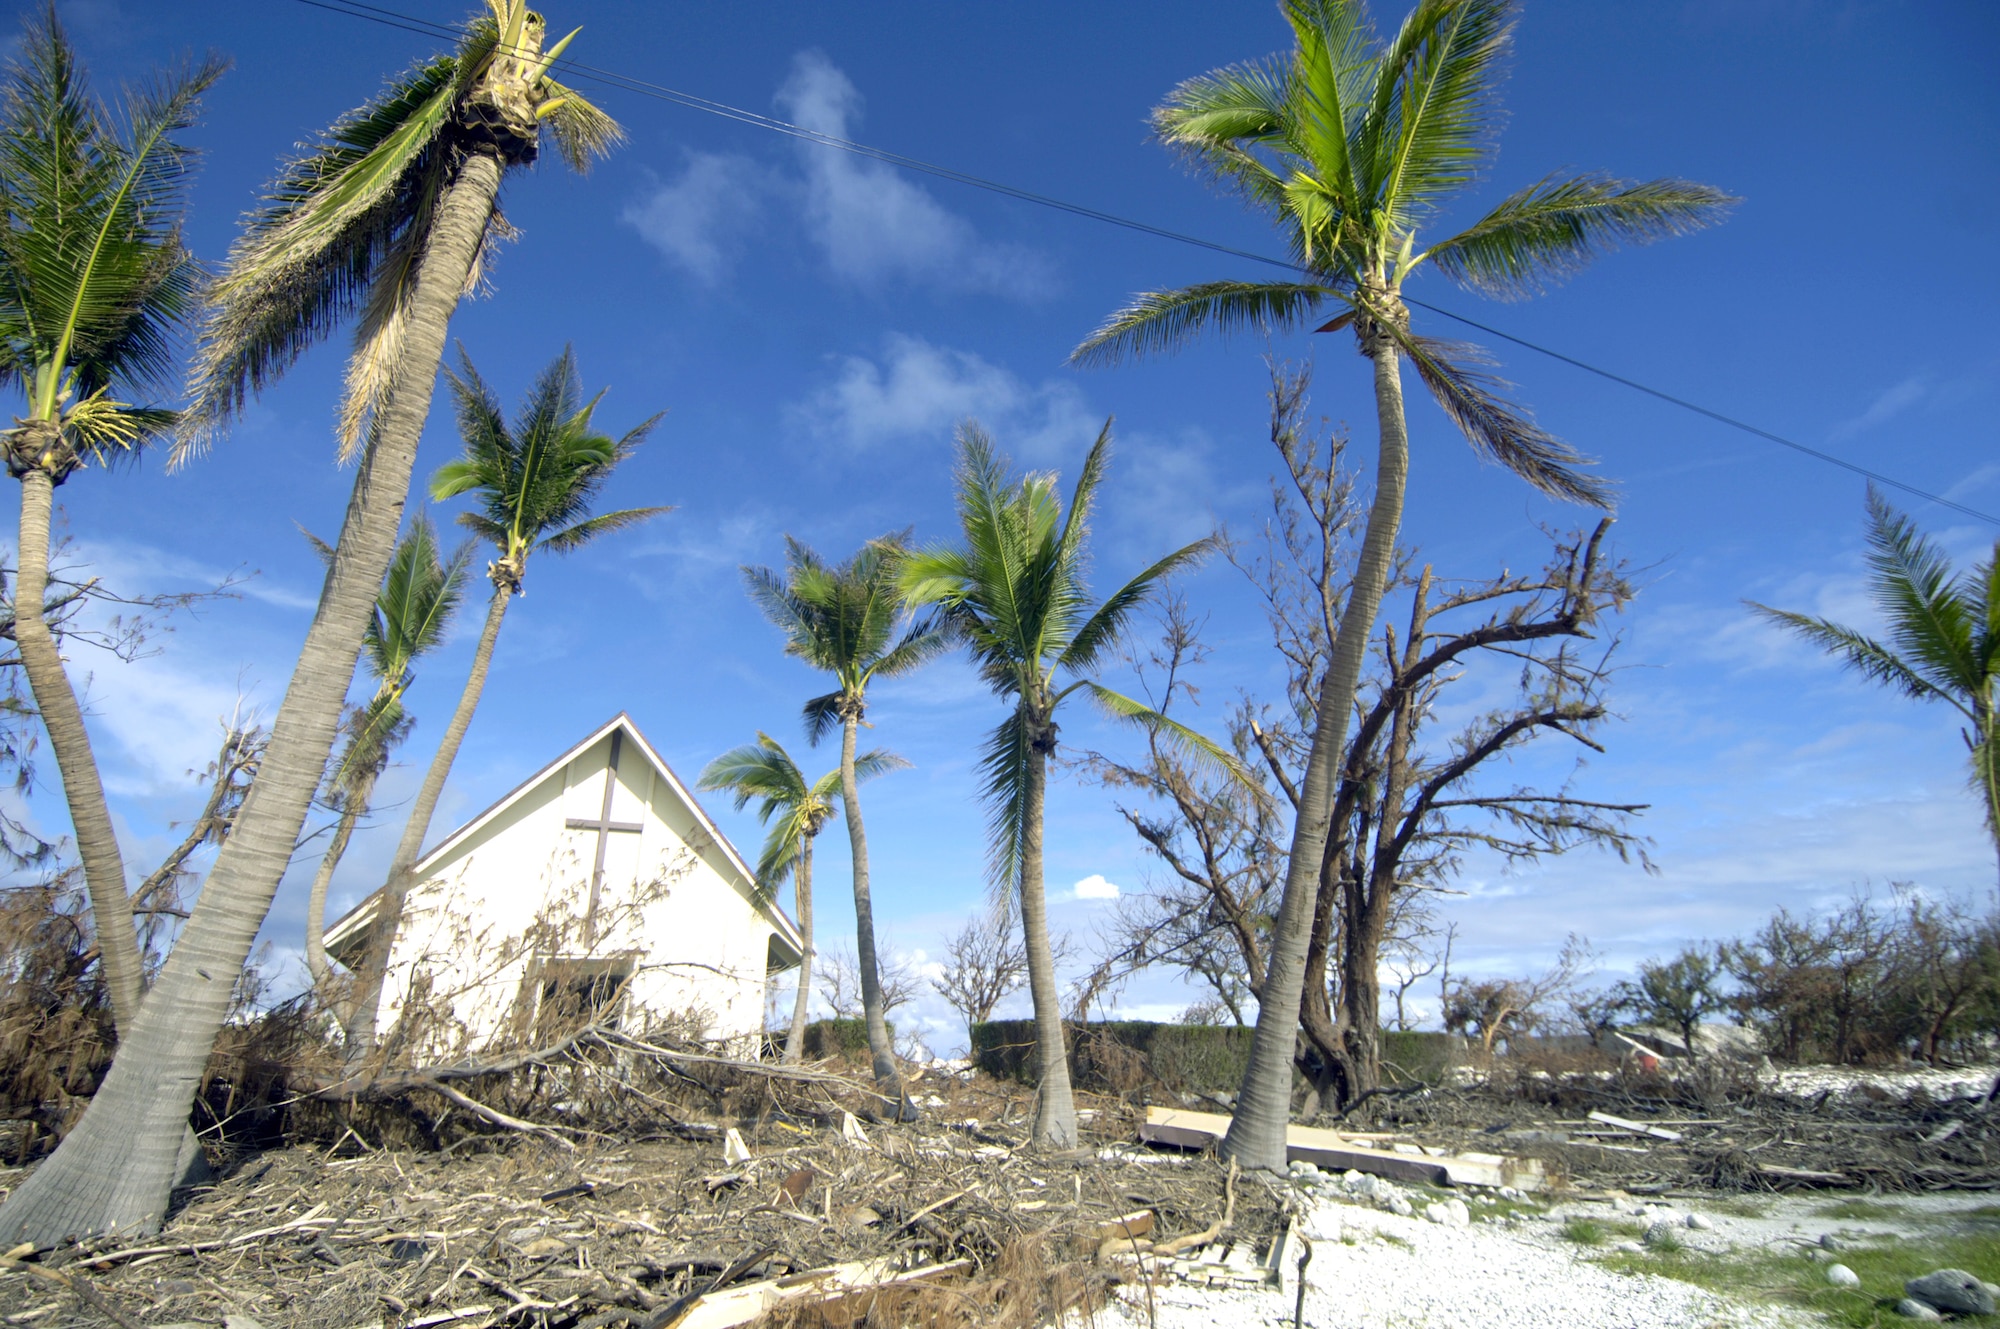 A damaged church, dead trees and debris on Wake Island are signs of the destruction left by Super Typhoon Ioke when it hit the island Aug. 31. A C-17 Globemaster III from Hickam Air Force Base, Hawaii, brought a 53-person team to the island Sept. 12 to assess damage left by the typhoon. (U.S. Air Force photo/Tech. Sgt. Shane A. Cuomo) 